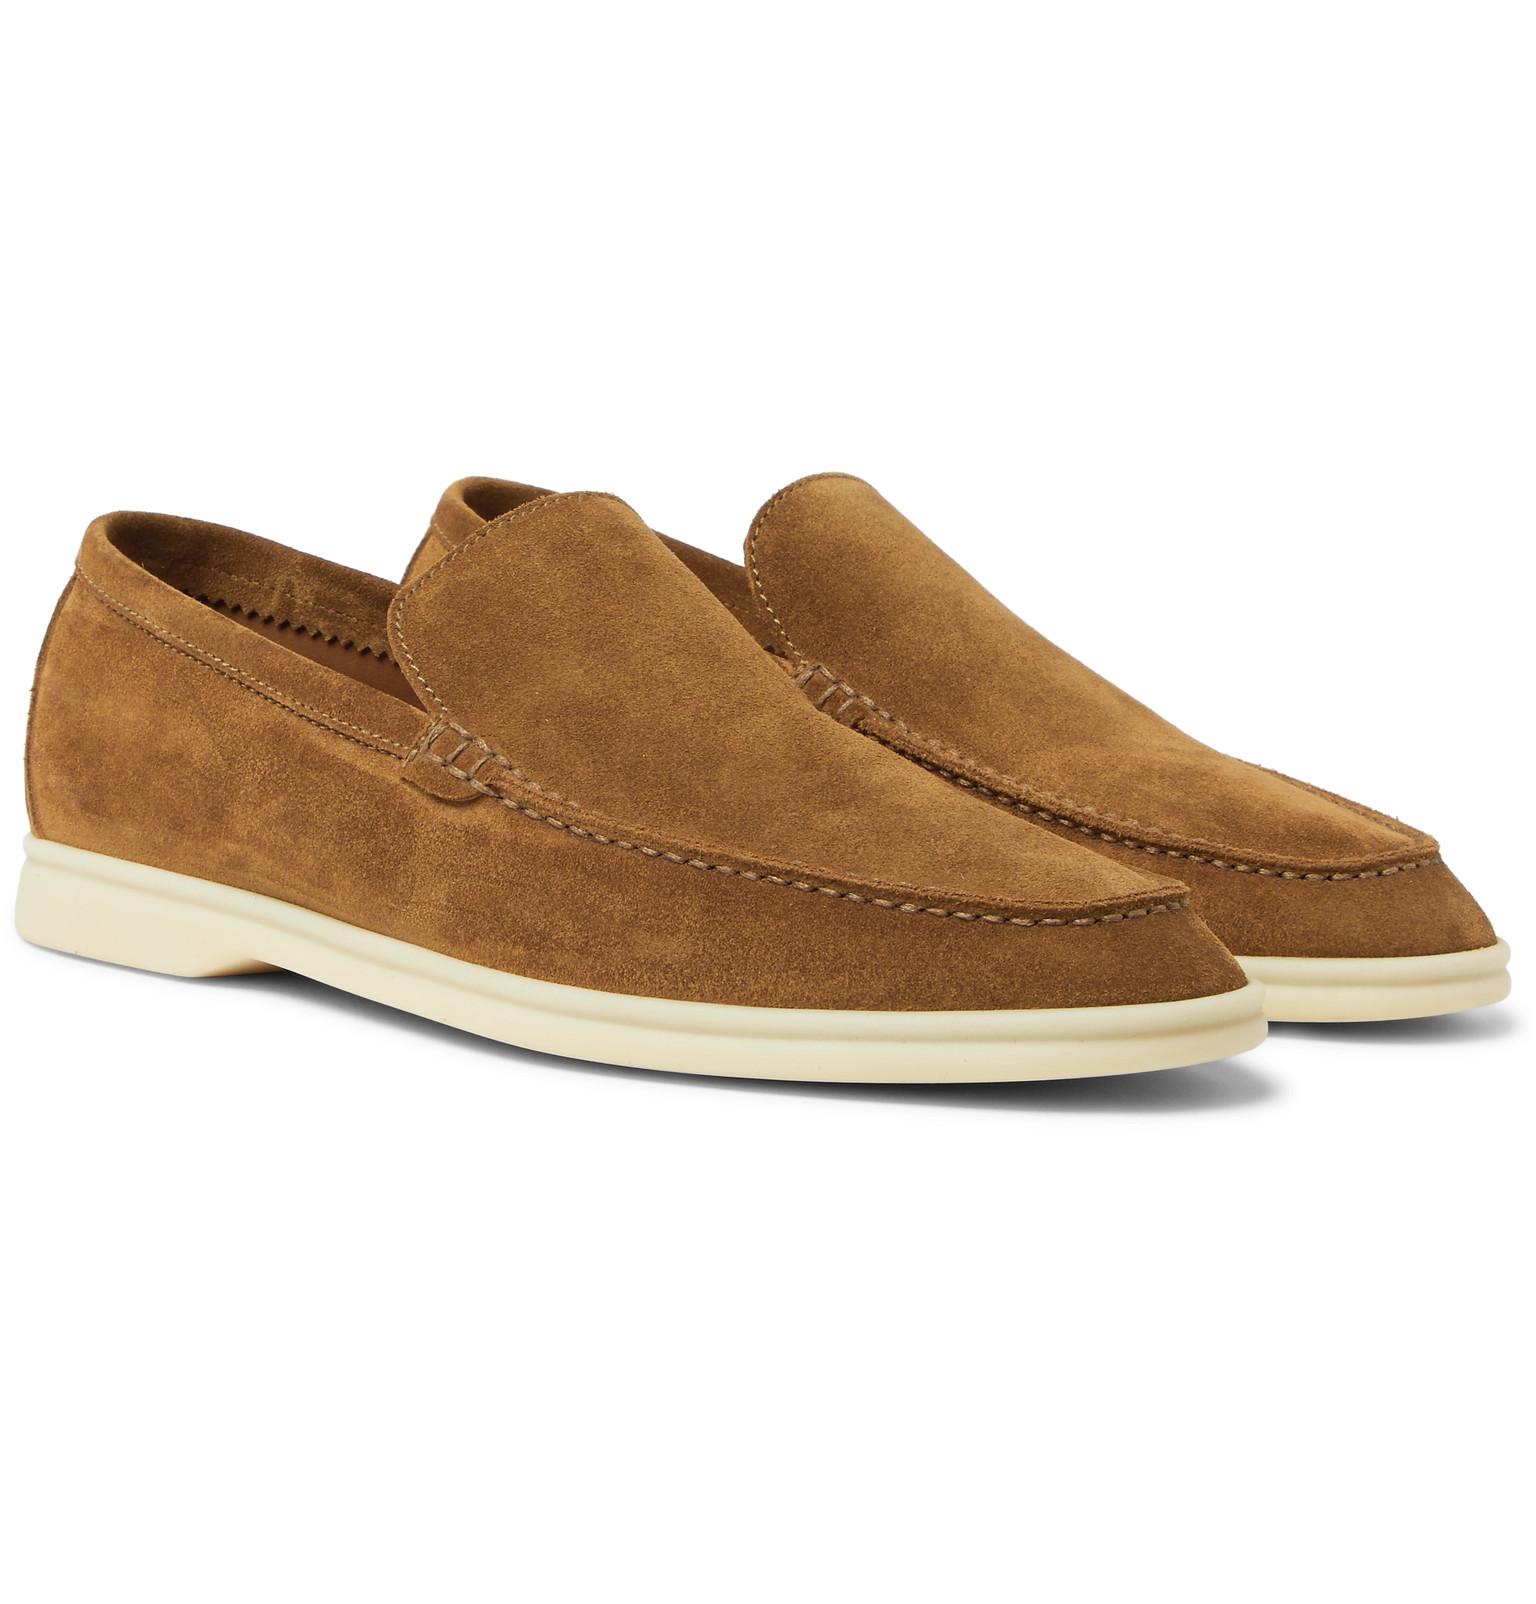 Loro Piana Summer Walk Suede Loafers in Tan (Brown) for Men - Save 24%